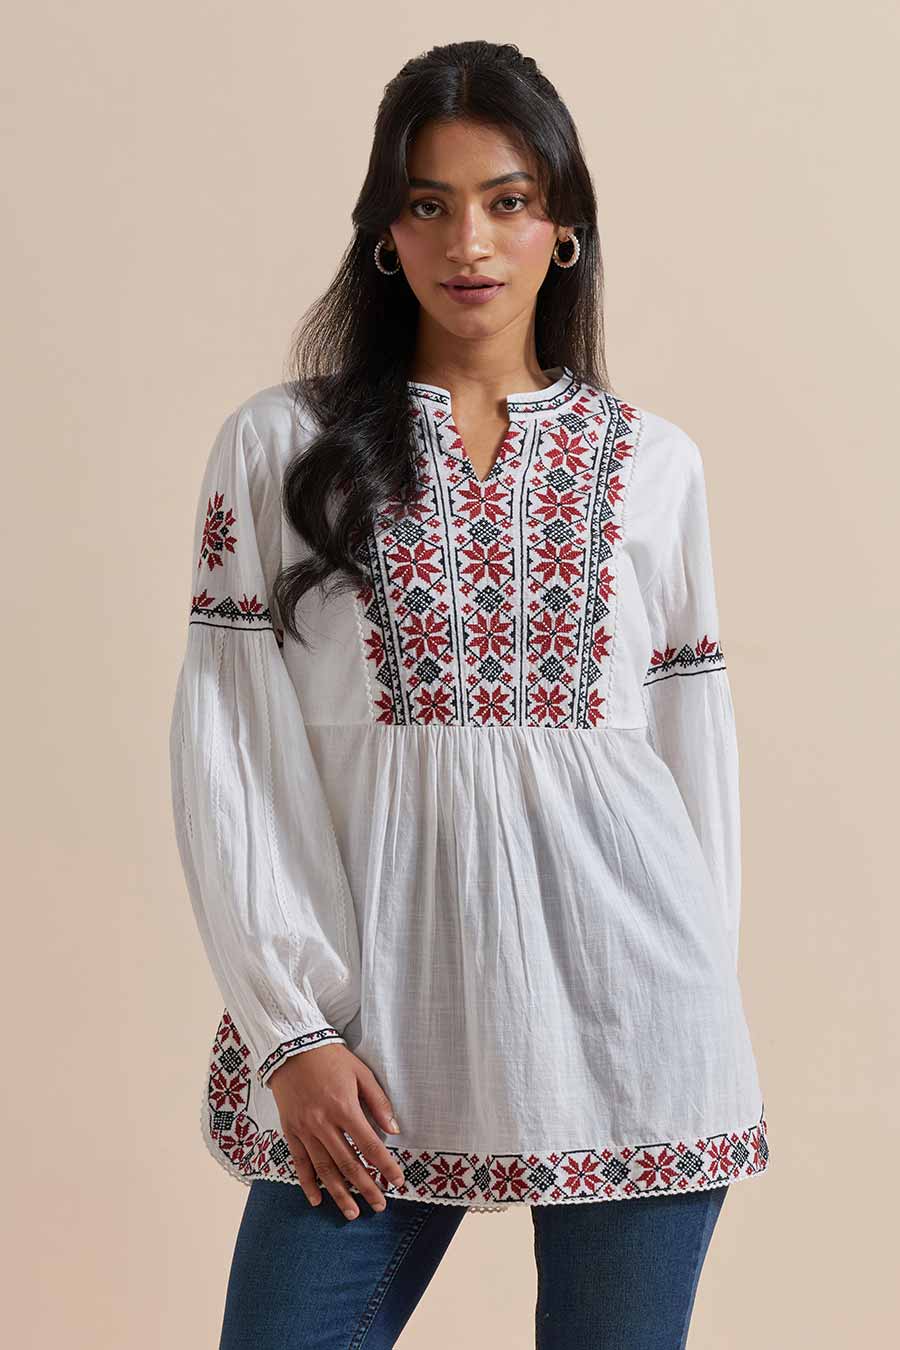 Shop White Cotton Embroidered Top by MUKUL at House of Designers